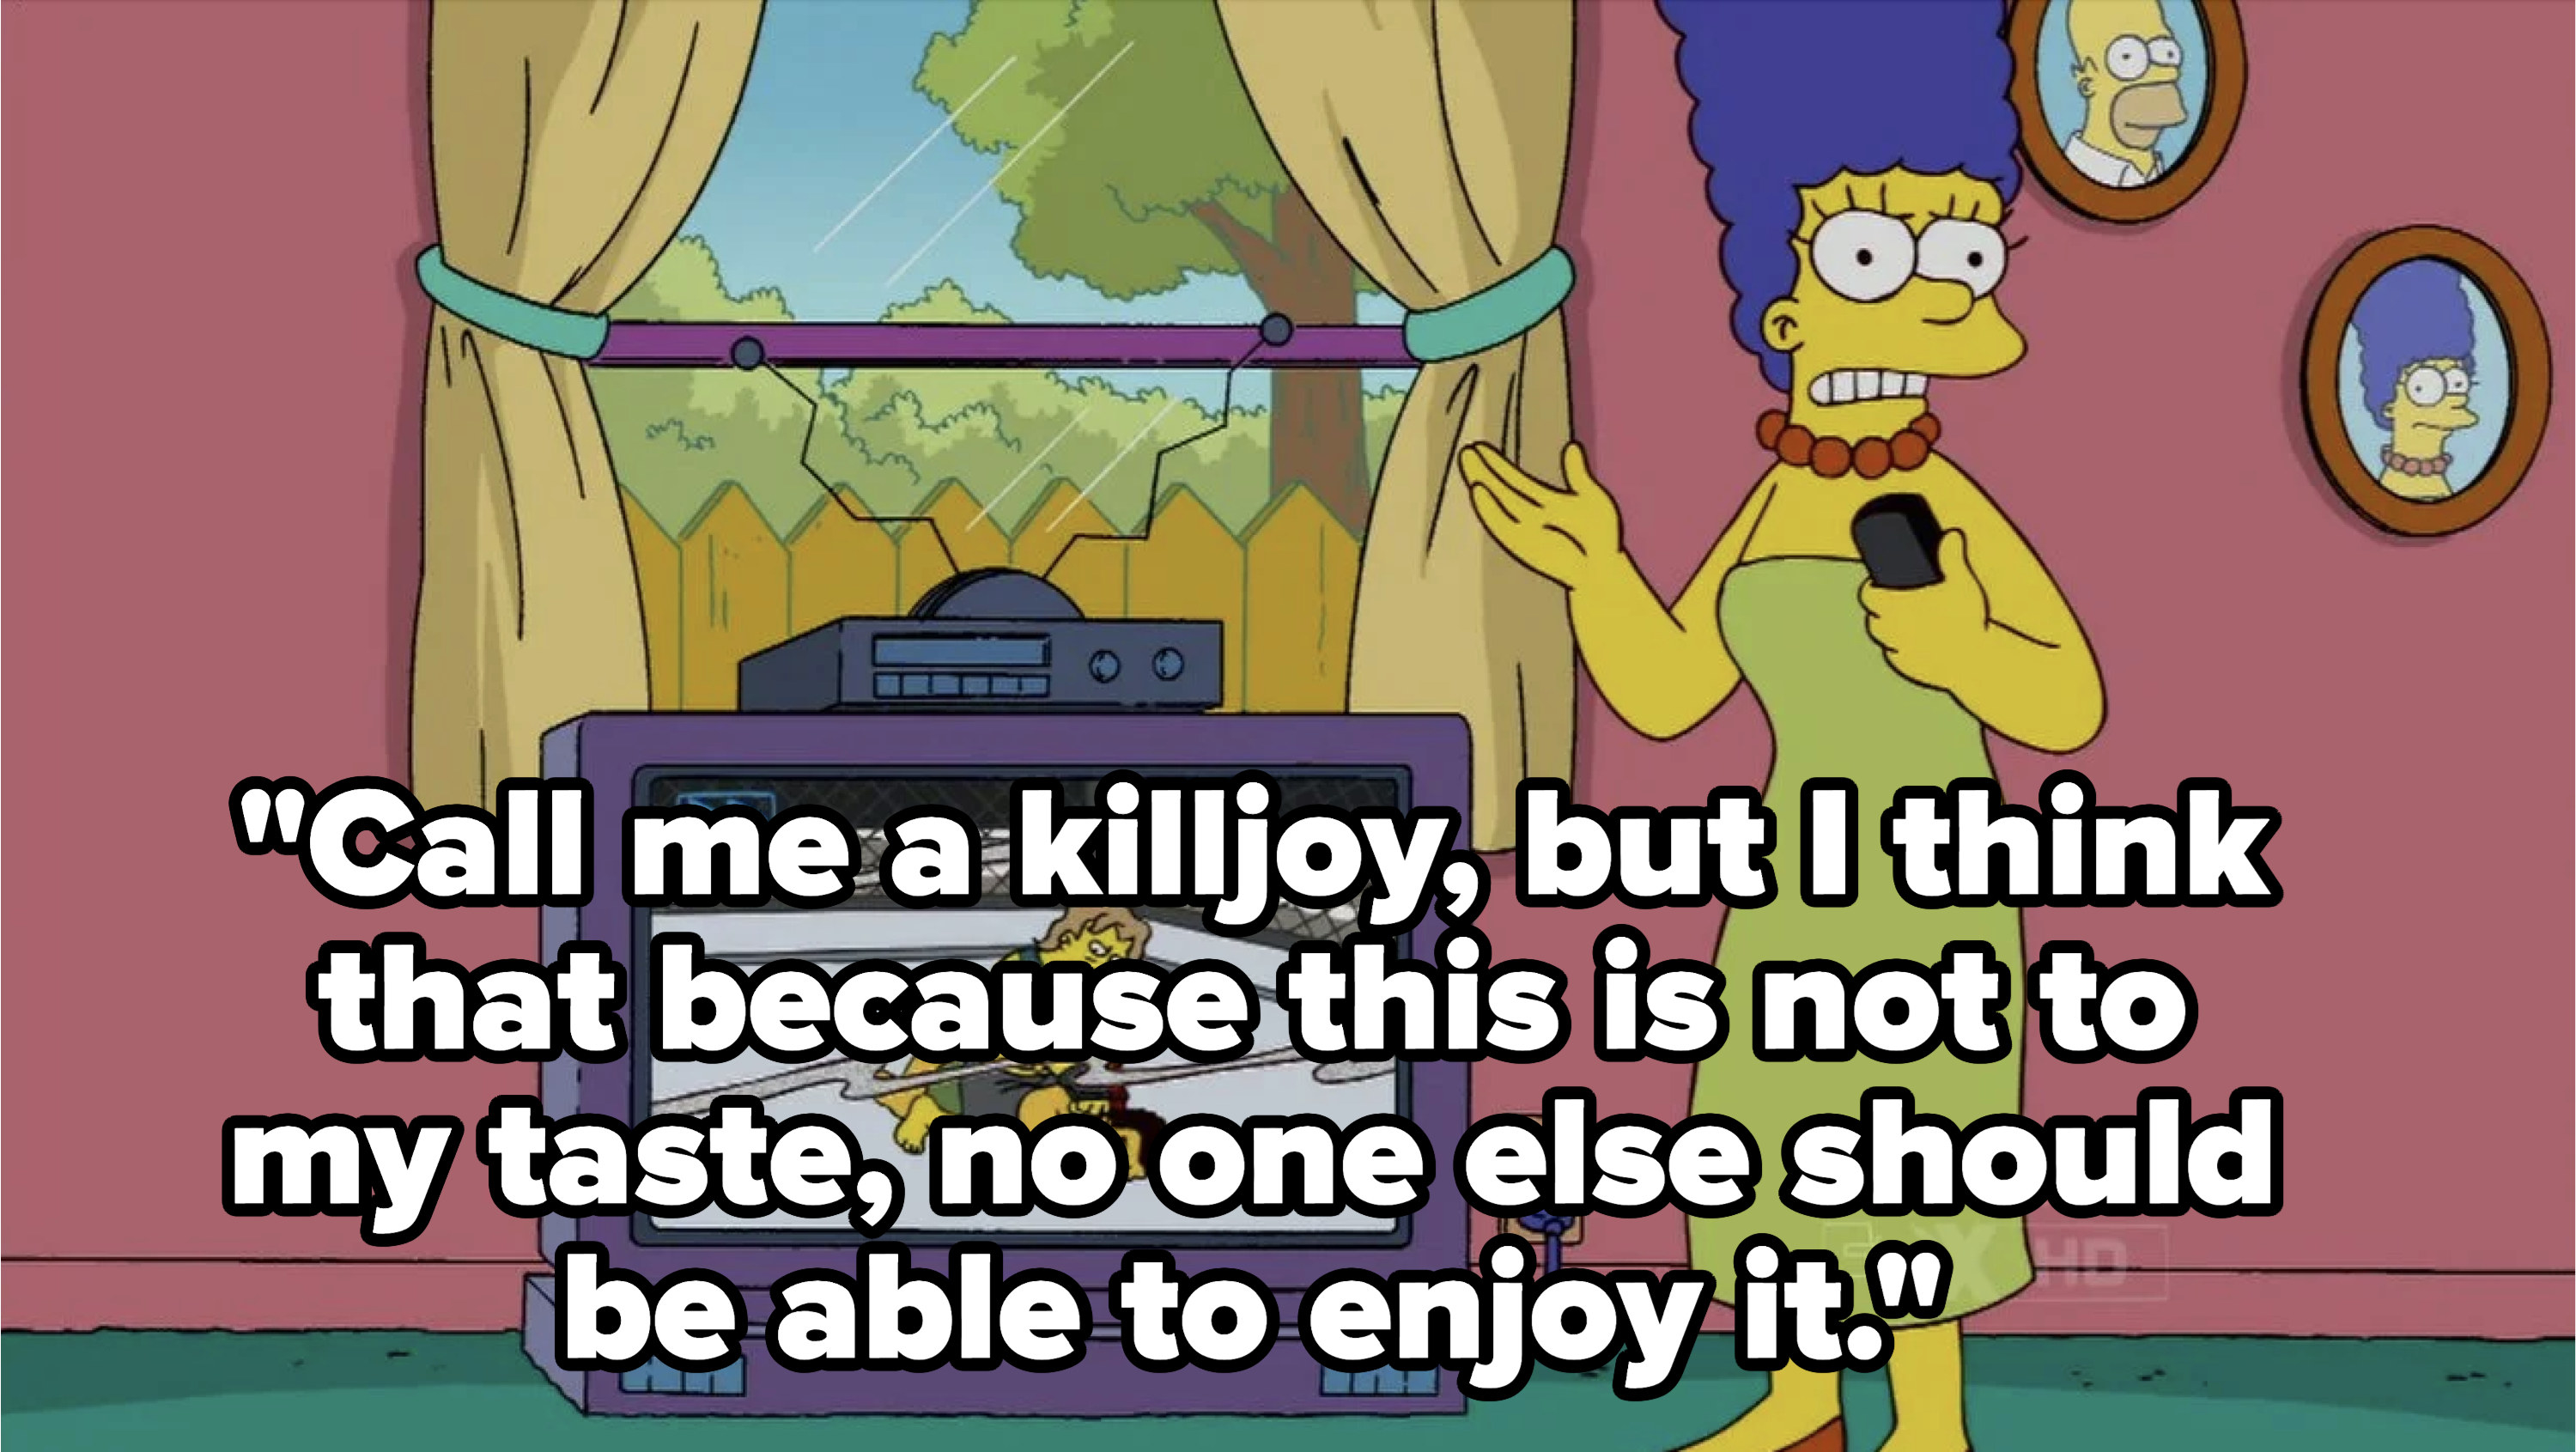 Marge Simpson: &quot;Call me a killjoy but I think that because this is not to my taste, no one else should be able to enjoy it&quot;